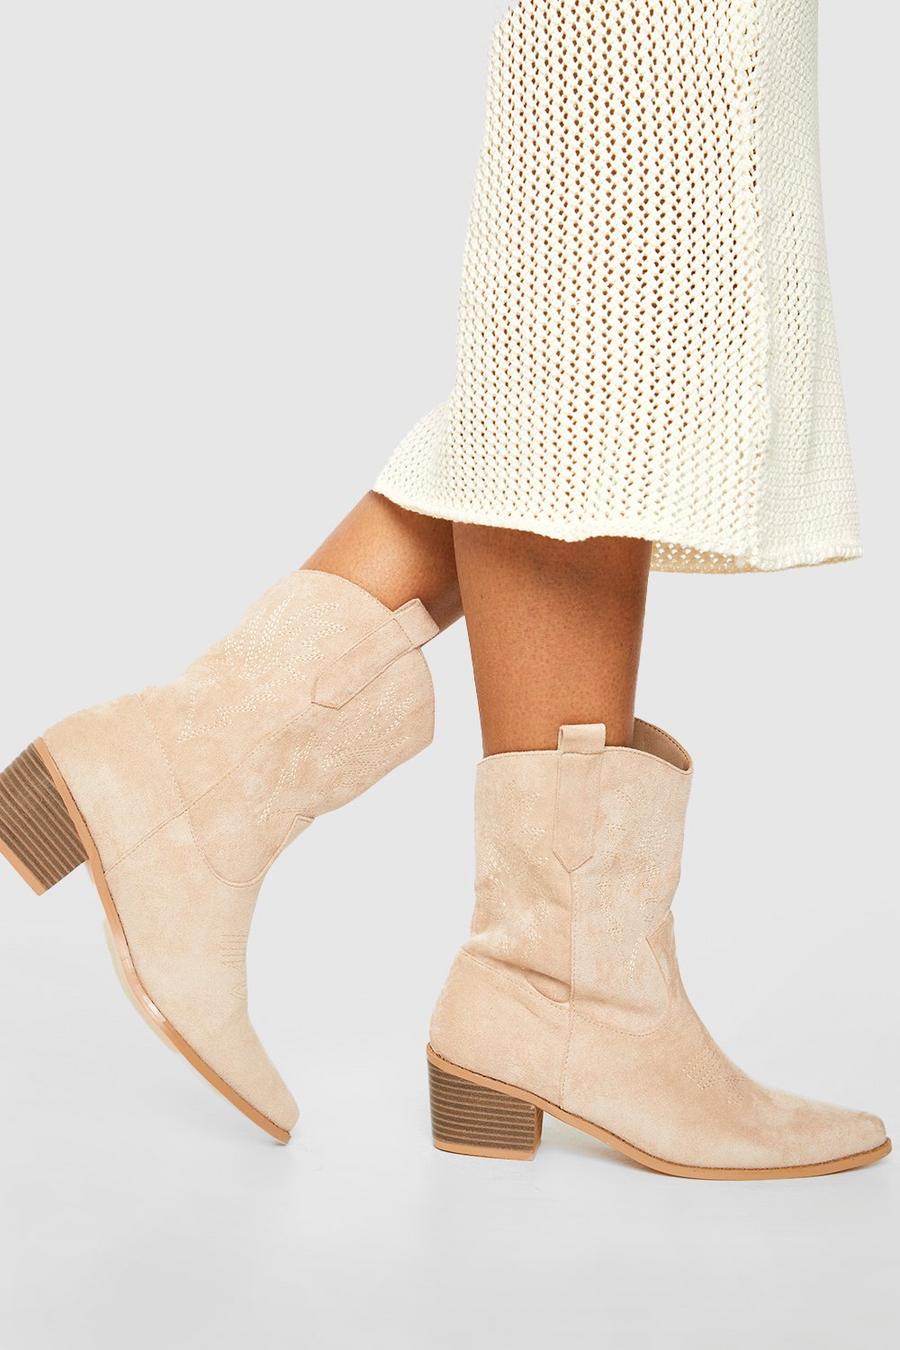 Sand beige Embroidered Western Cowboy Boots 